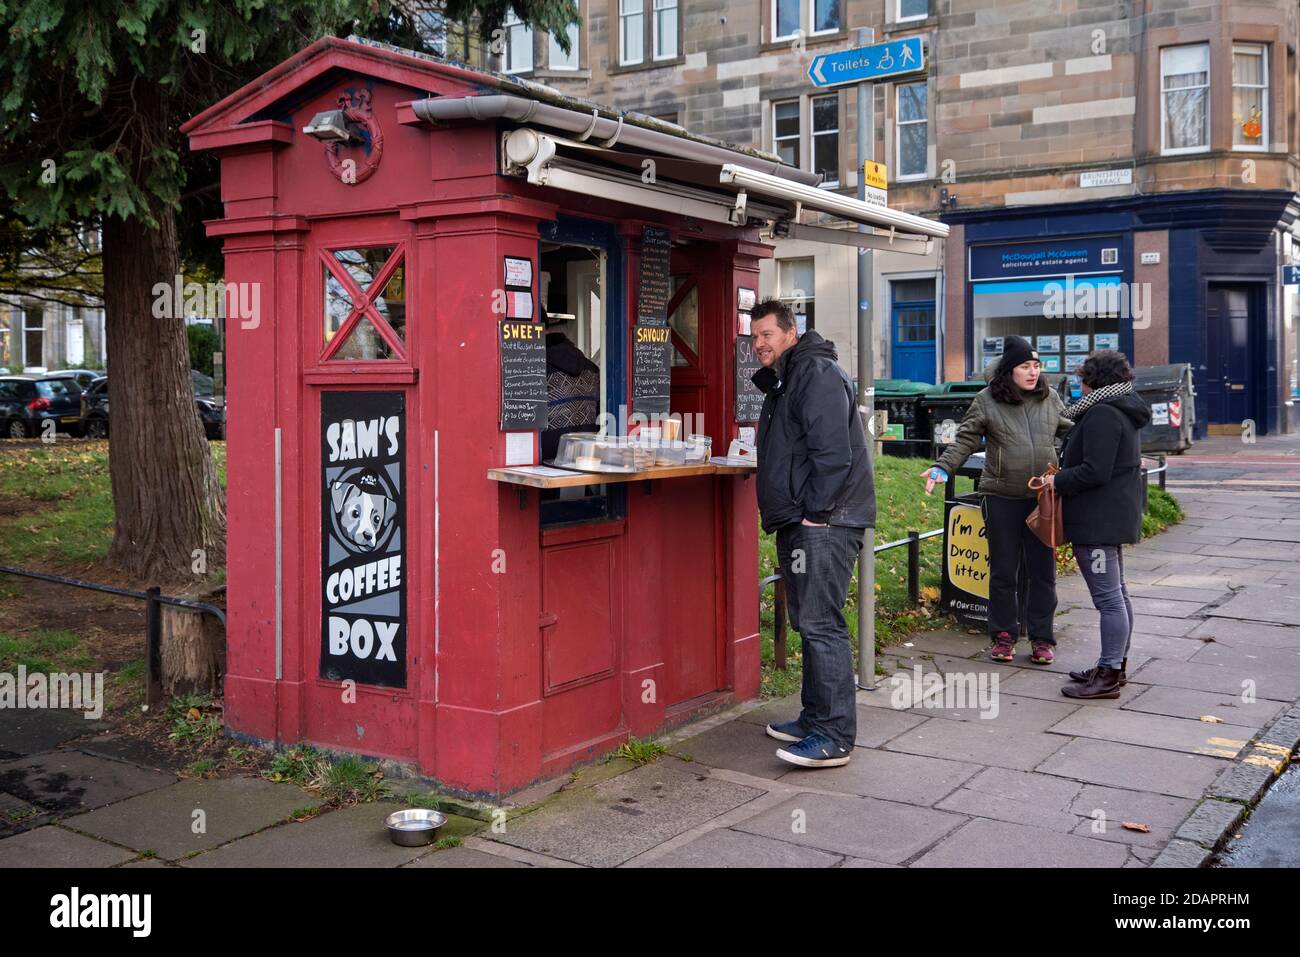 Police box in Bruntsfield Place Edinburgh which has been converted into Sam's Coffee Box. Stock Photo